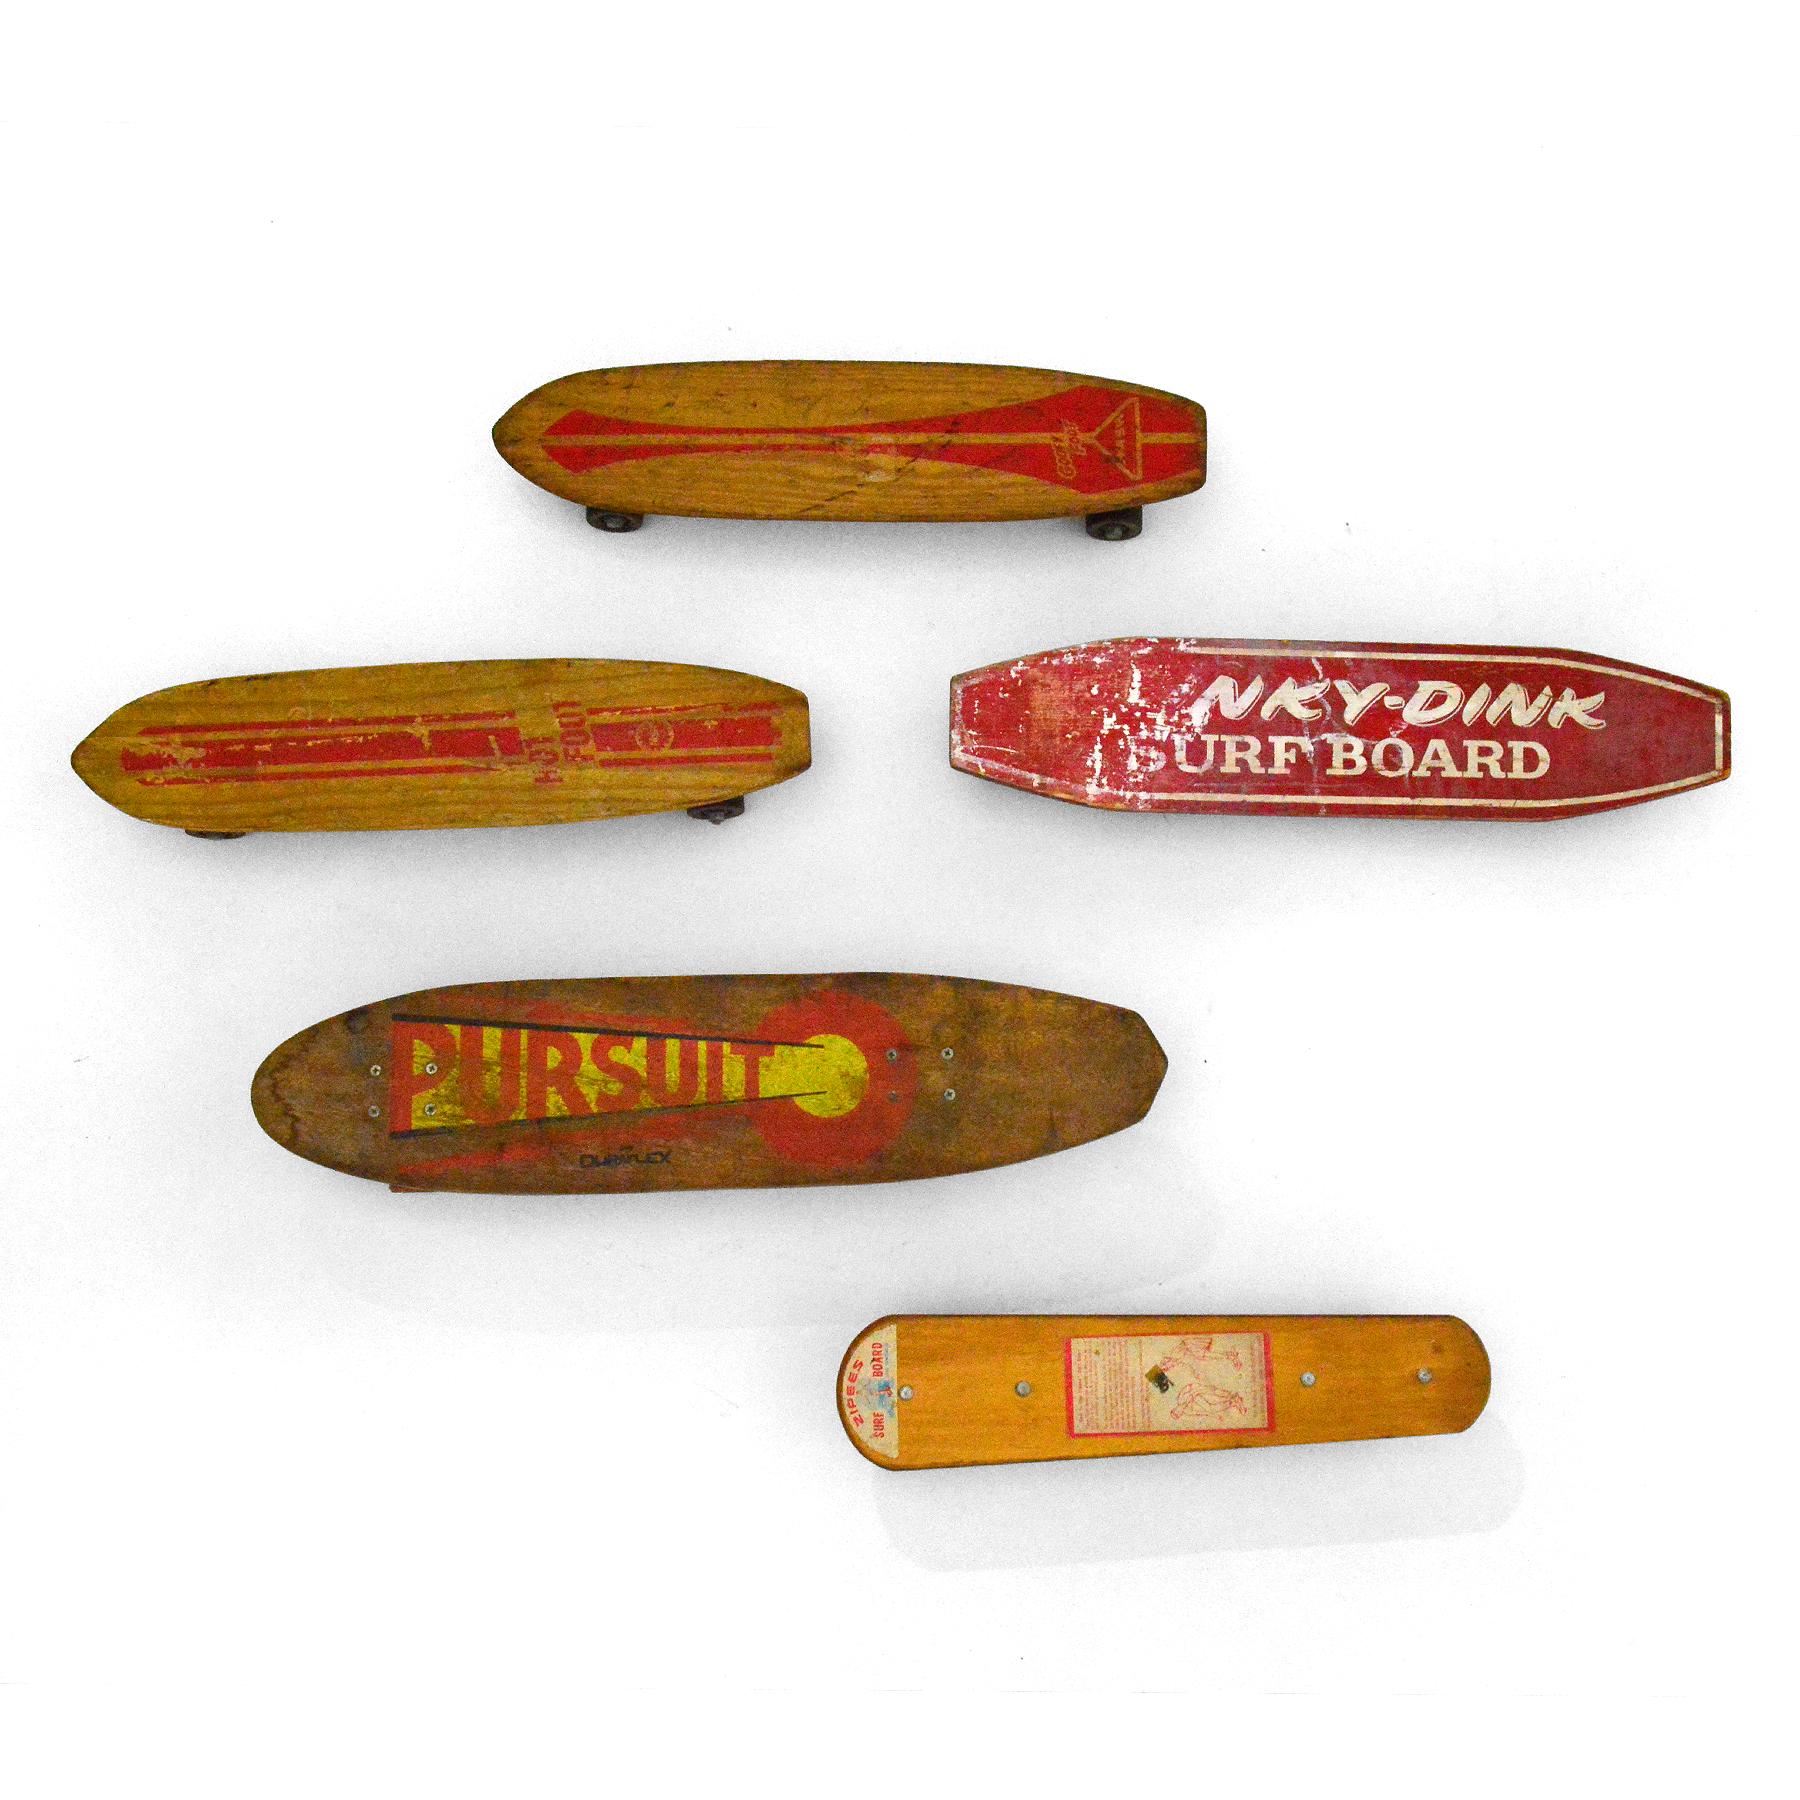 American Collection of Vintage Skateboards